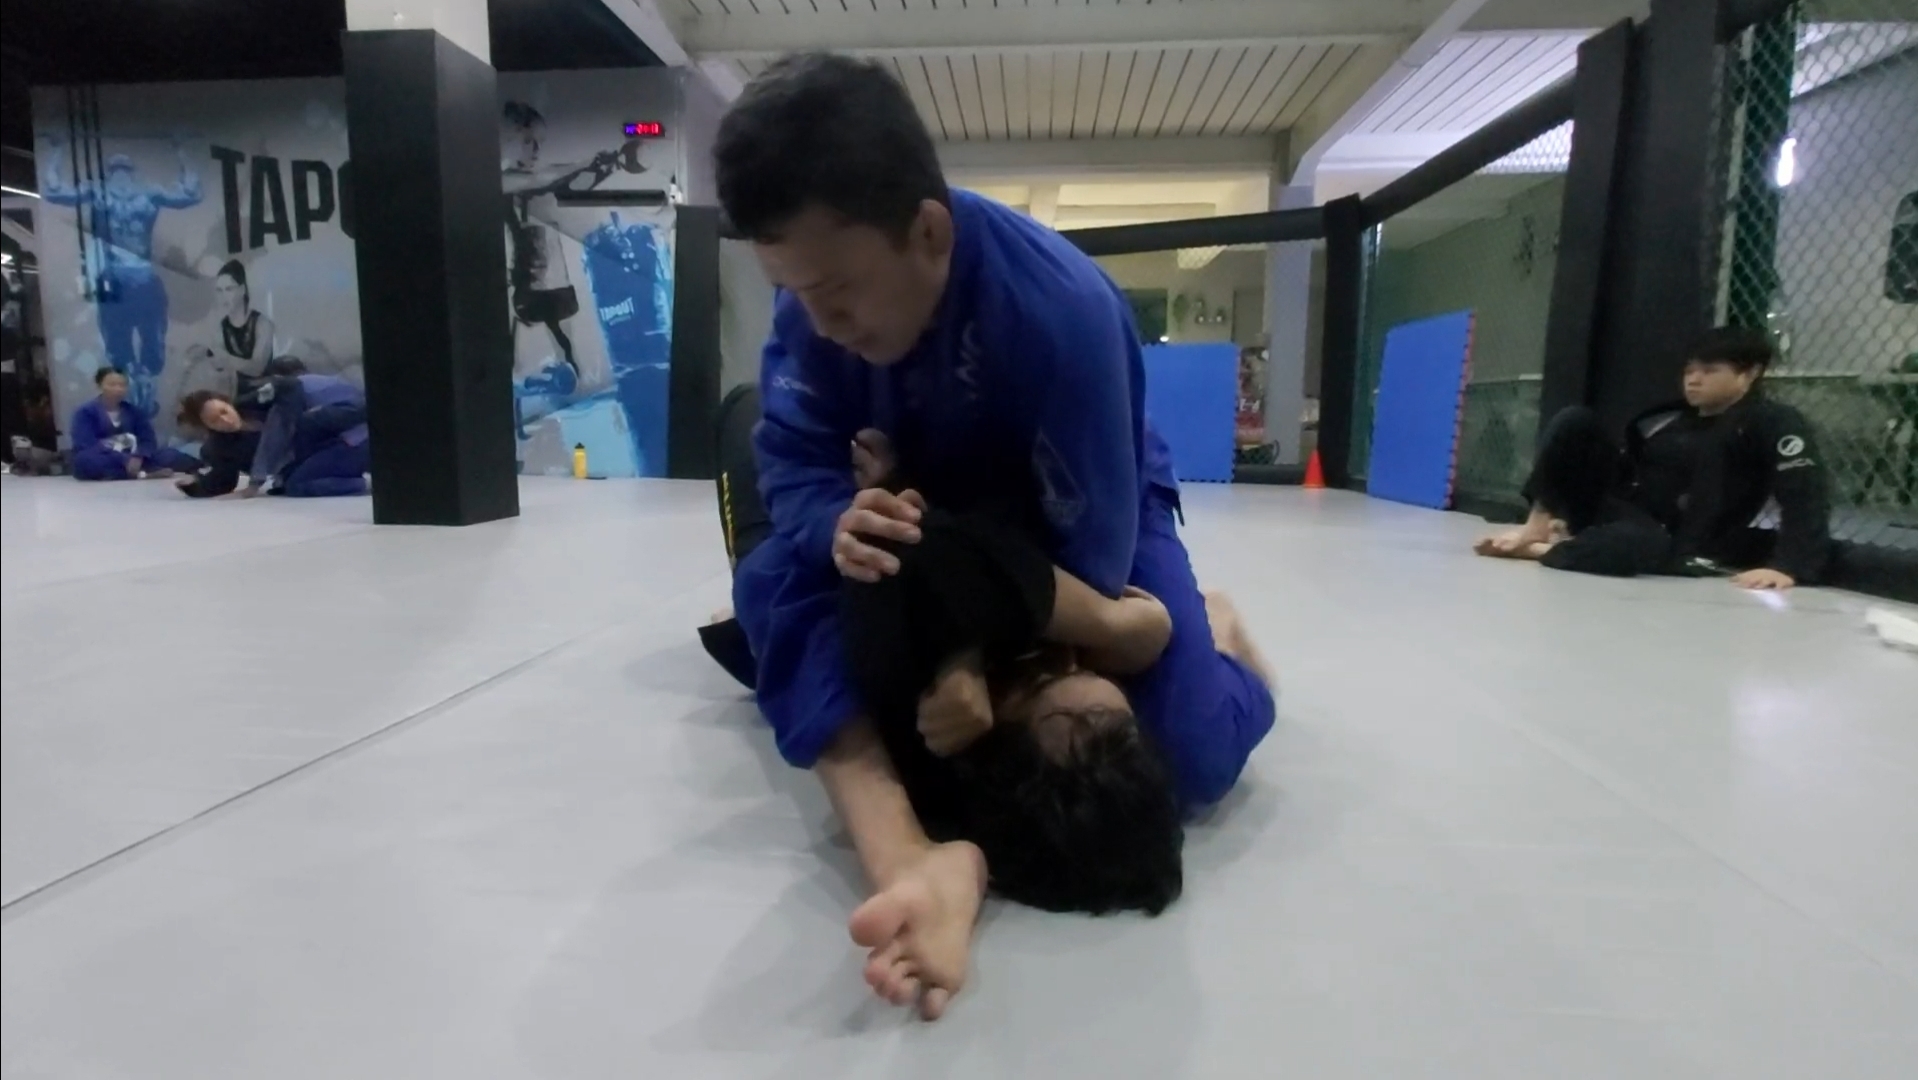 Tapping Out 101: A Beginner’s Guide to Surrendering in BJJ